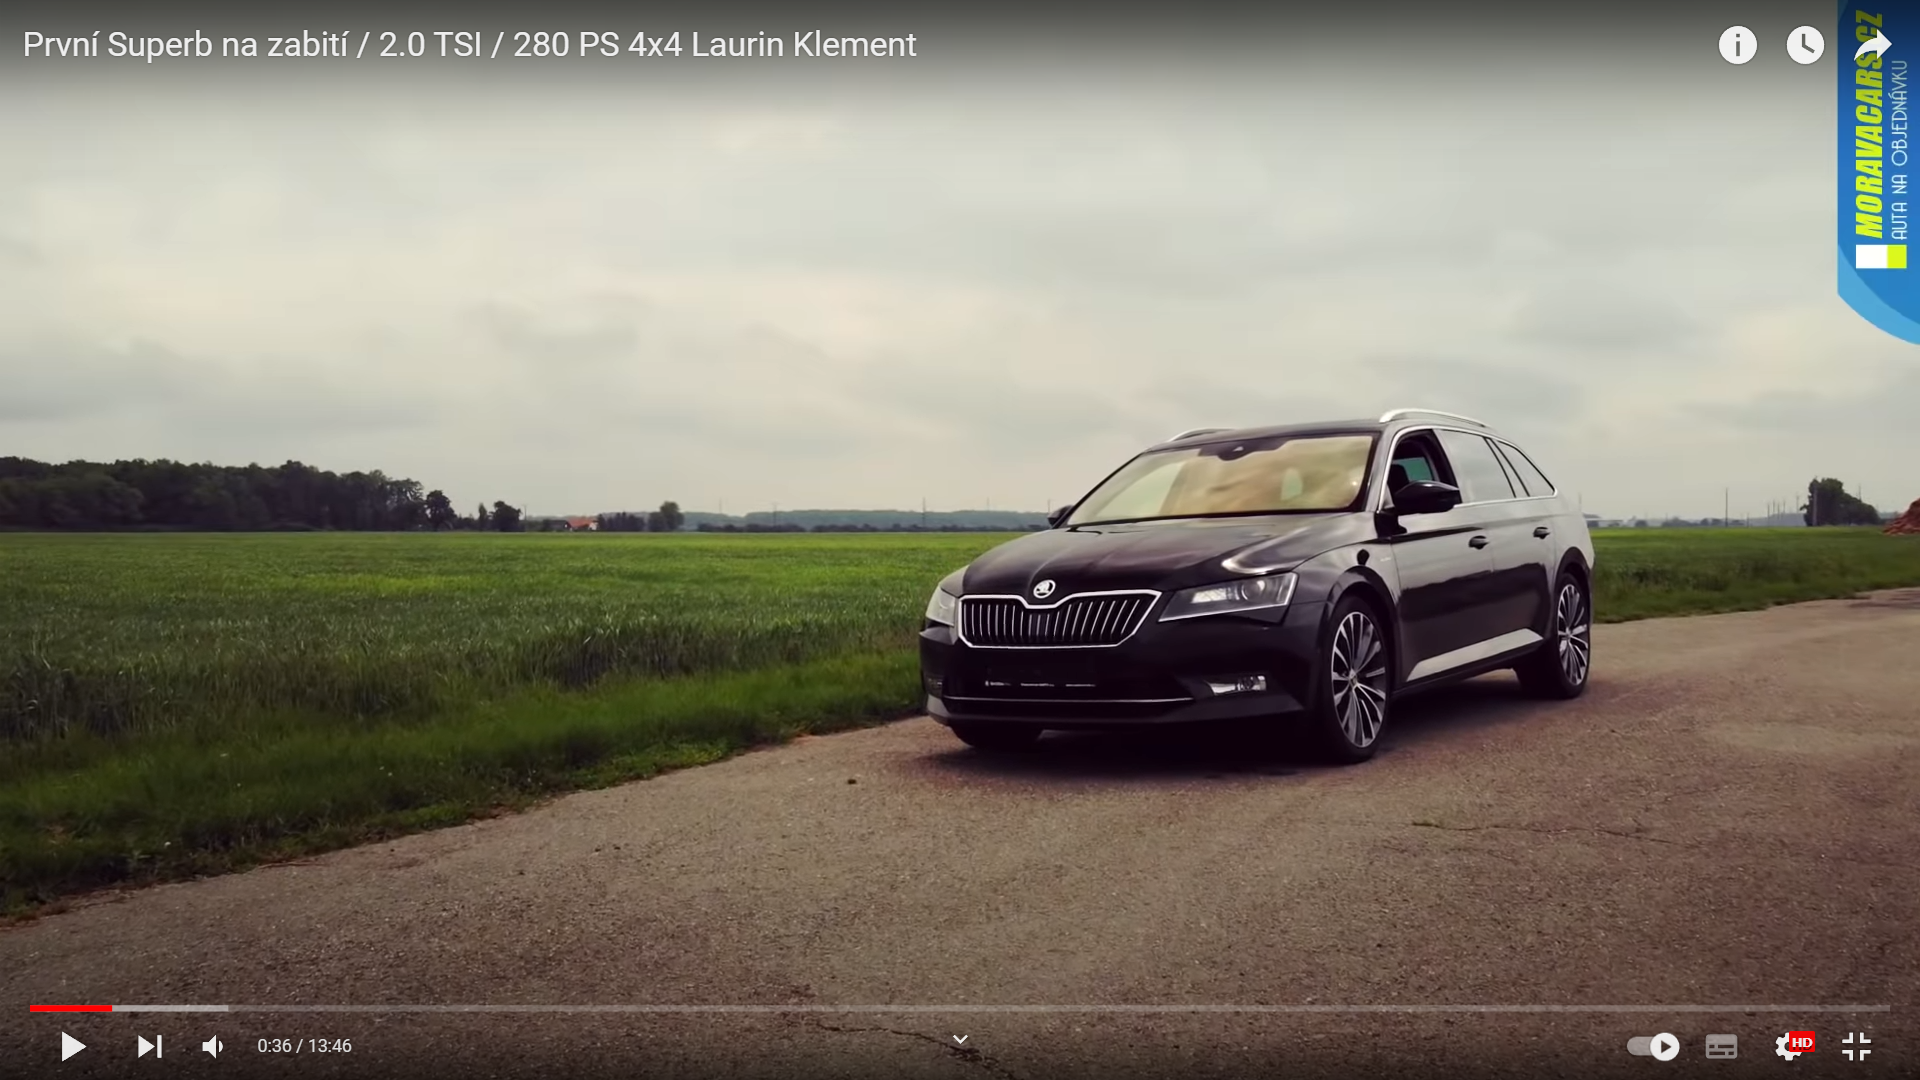 SUPERB 2.0 TSI 206kw LAURIN A KLEMENT